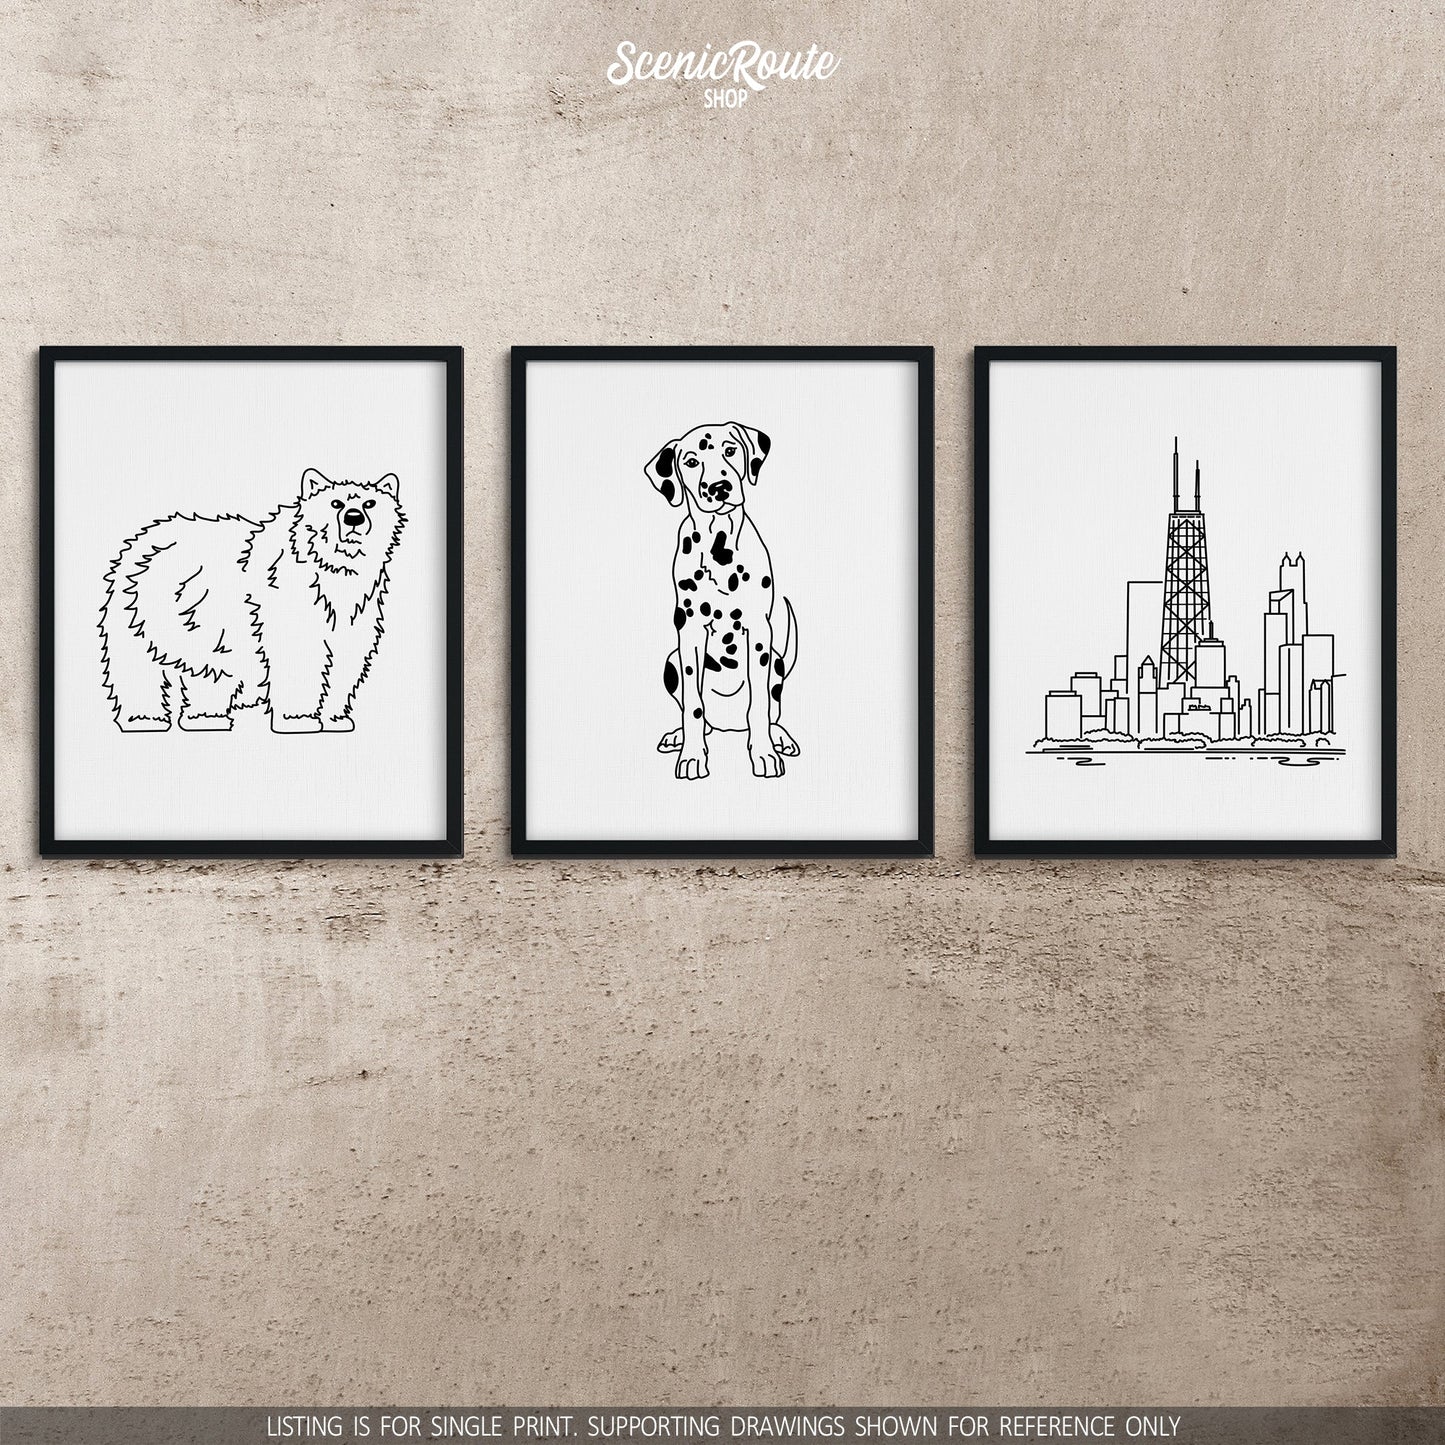 A group of three framed drawings on a concrete wall.  The line art drawings include a Grizzly Bear, a Dalmatian dog, and the John Hancock Tower in Chicago